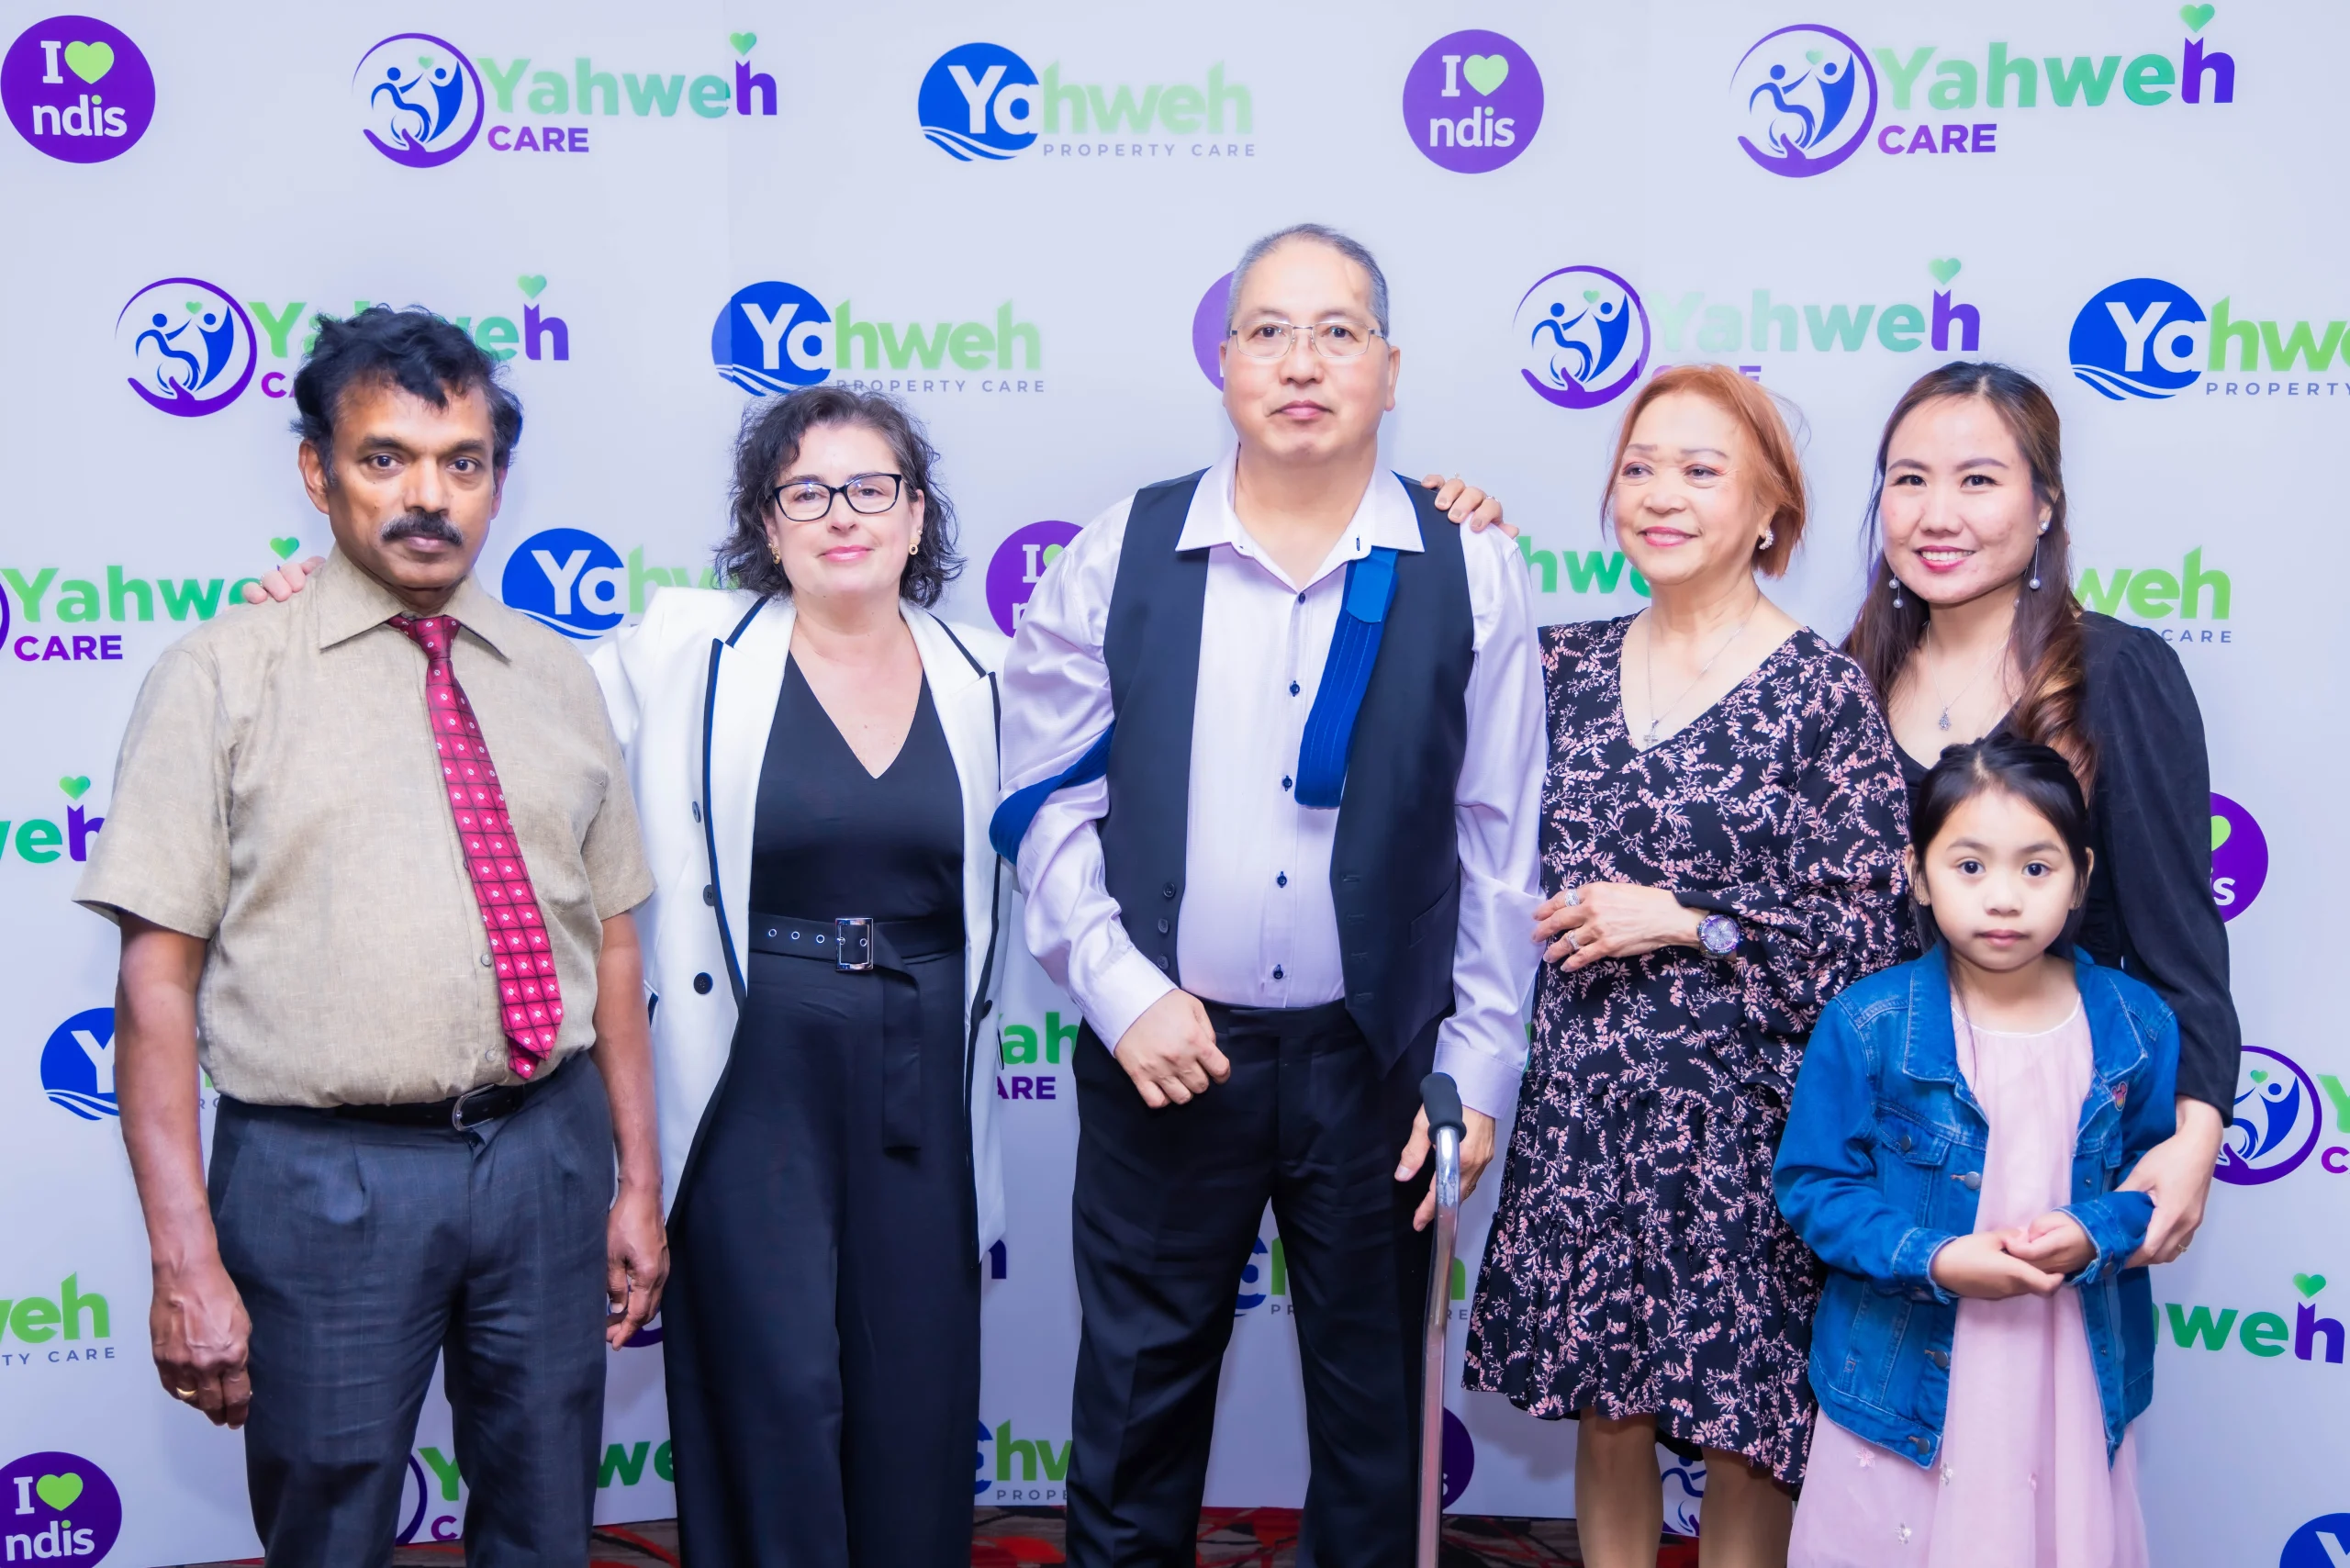 Group photo of five individuals standing in front of a blue Yahweh Care backdrop 